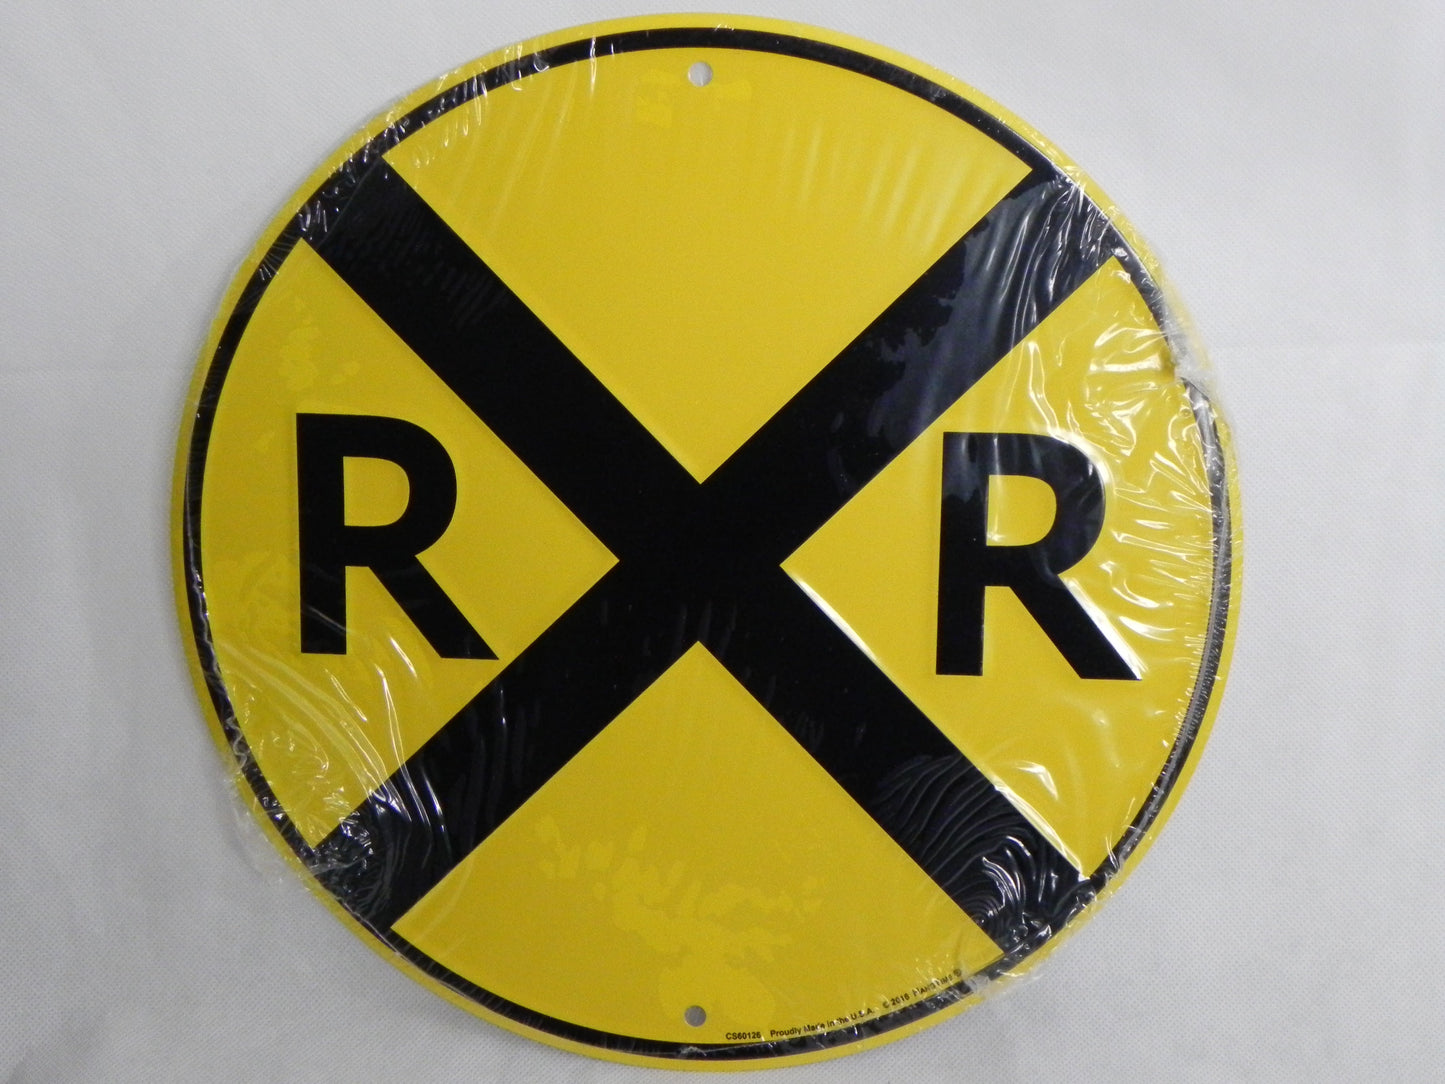  Railroad Crossing Sign  24 inch Round